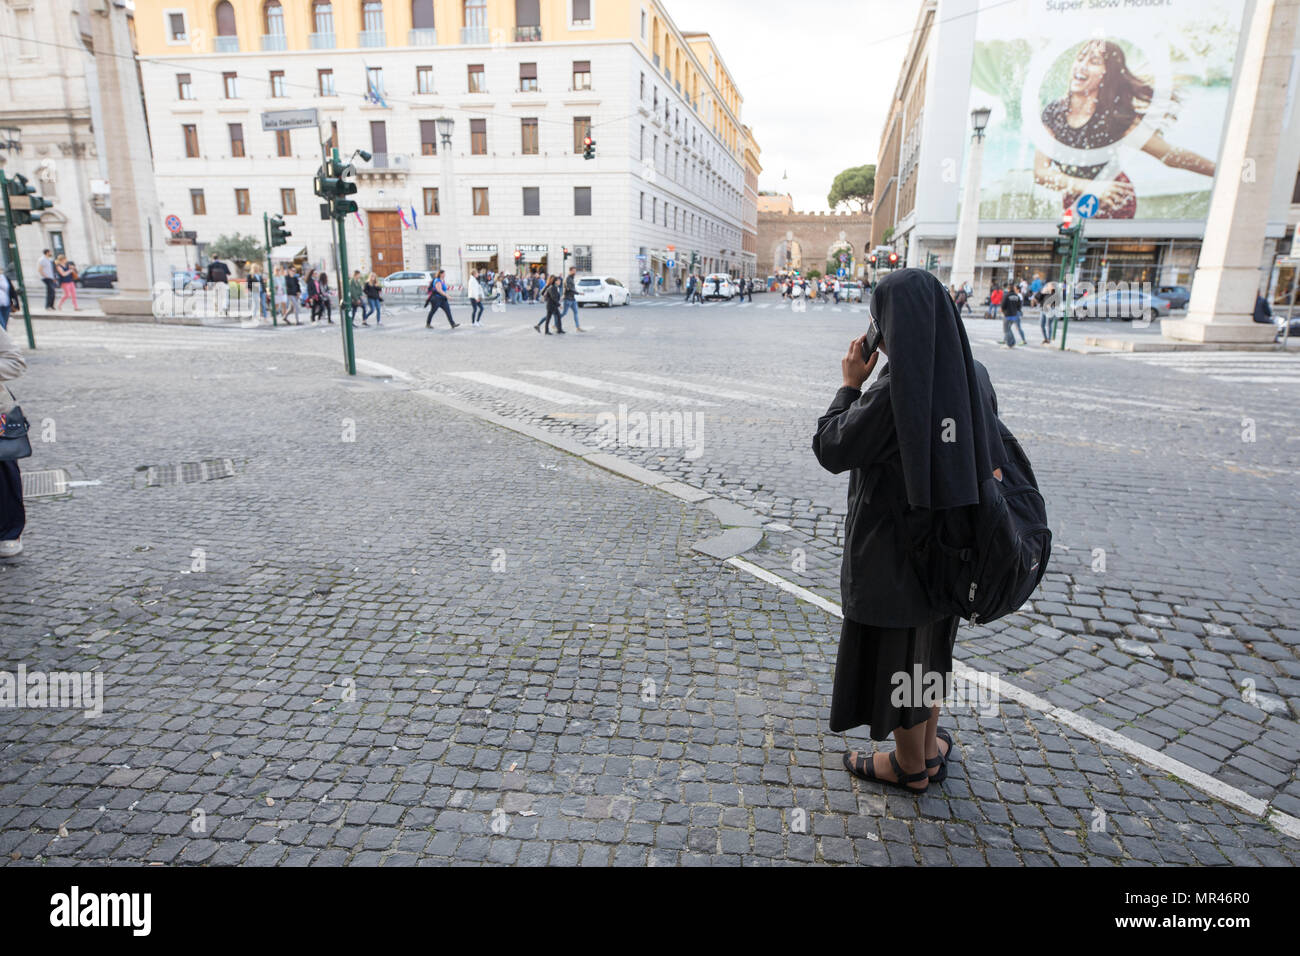 Nun phoning standing in street, Rome Italy Stock Photo